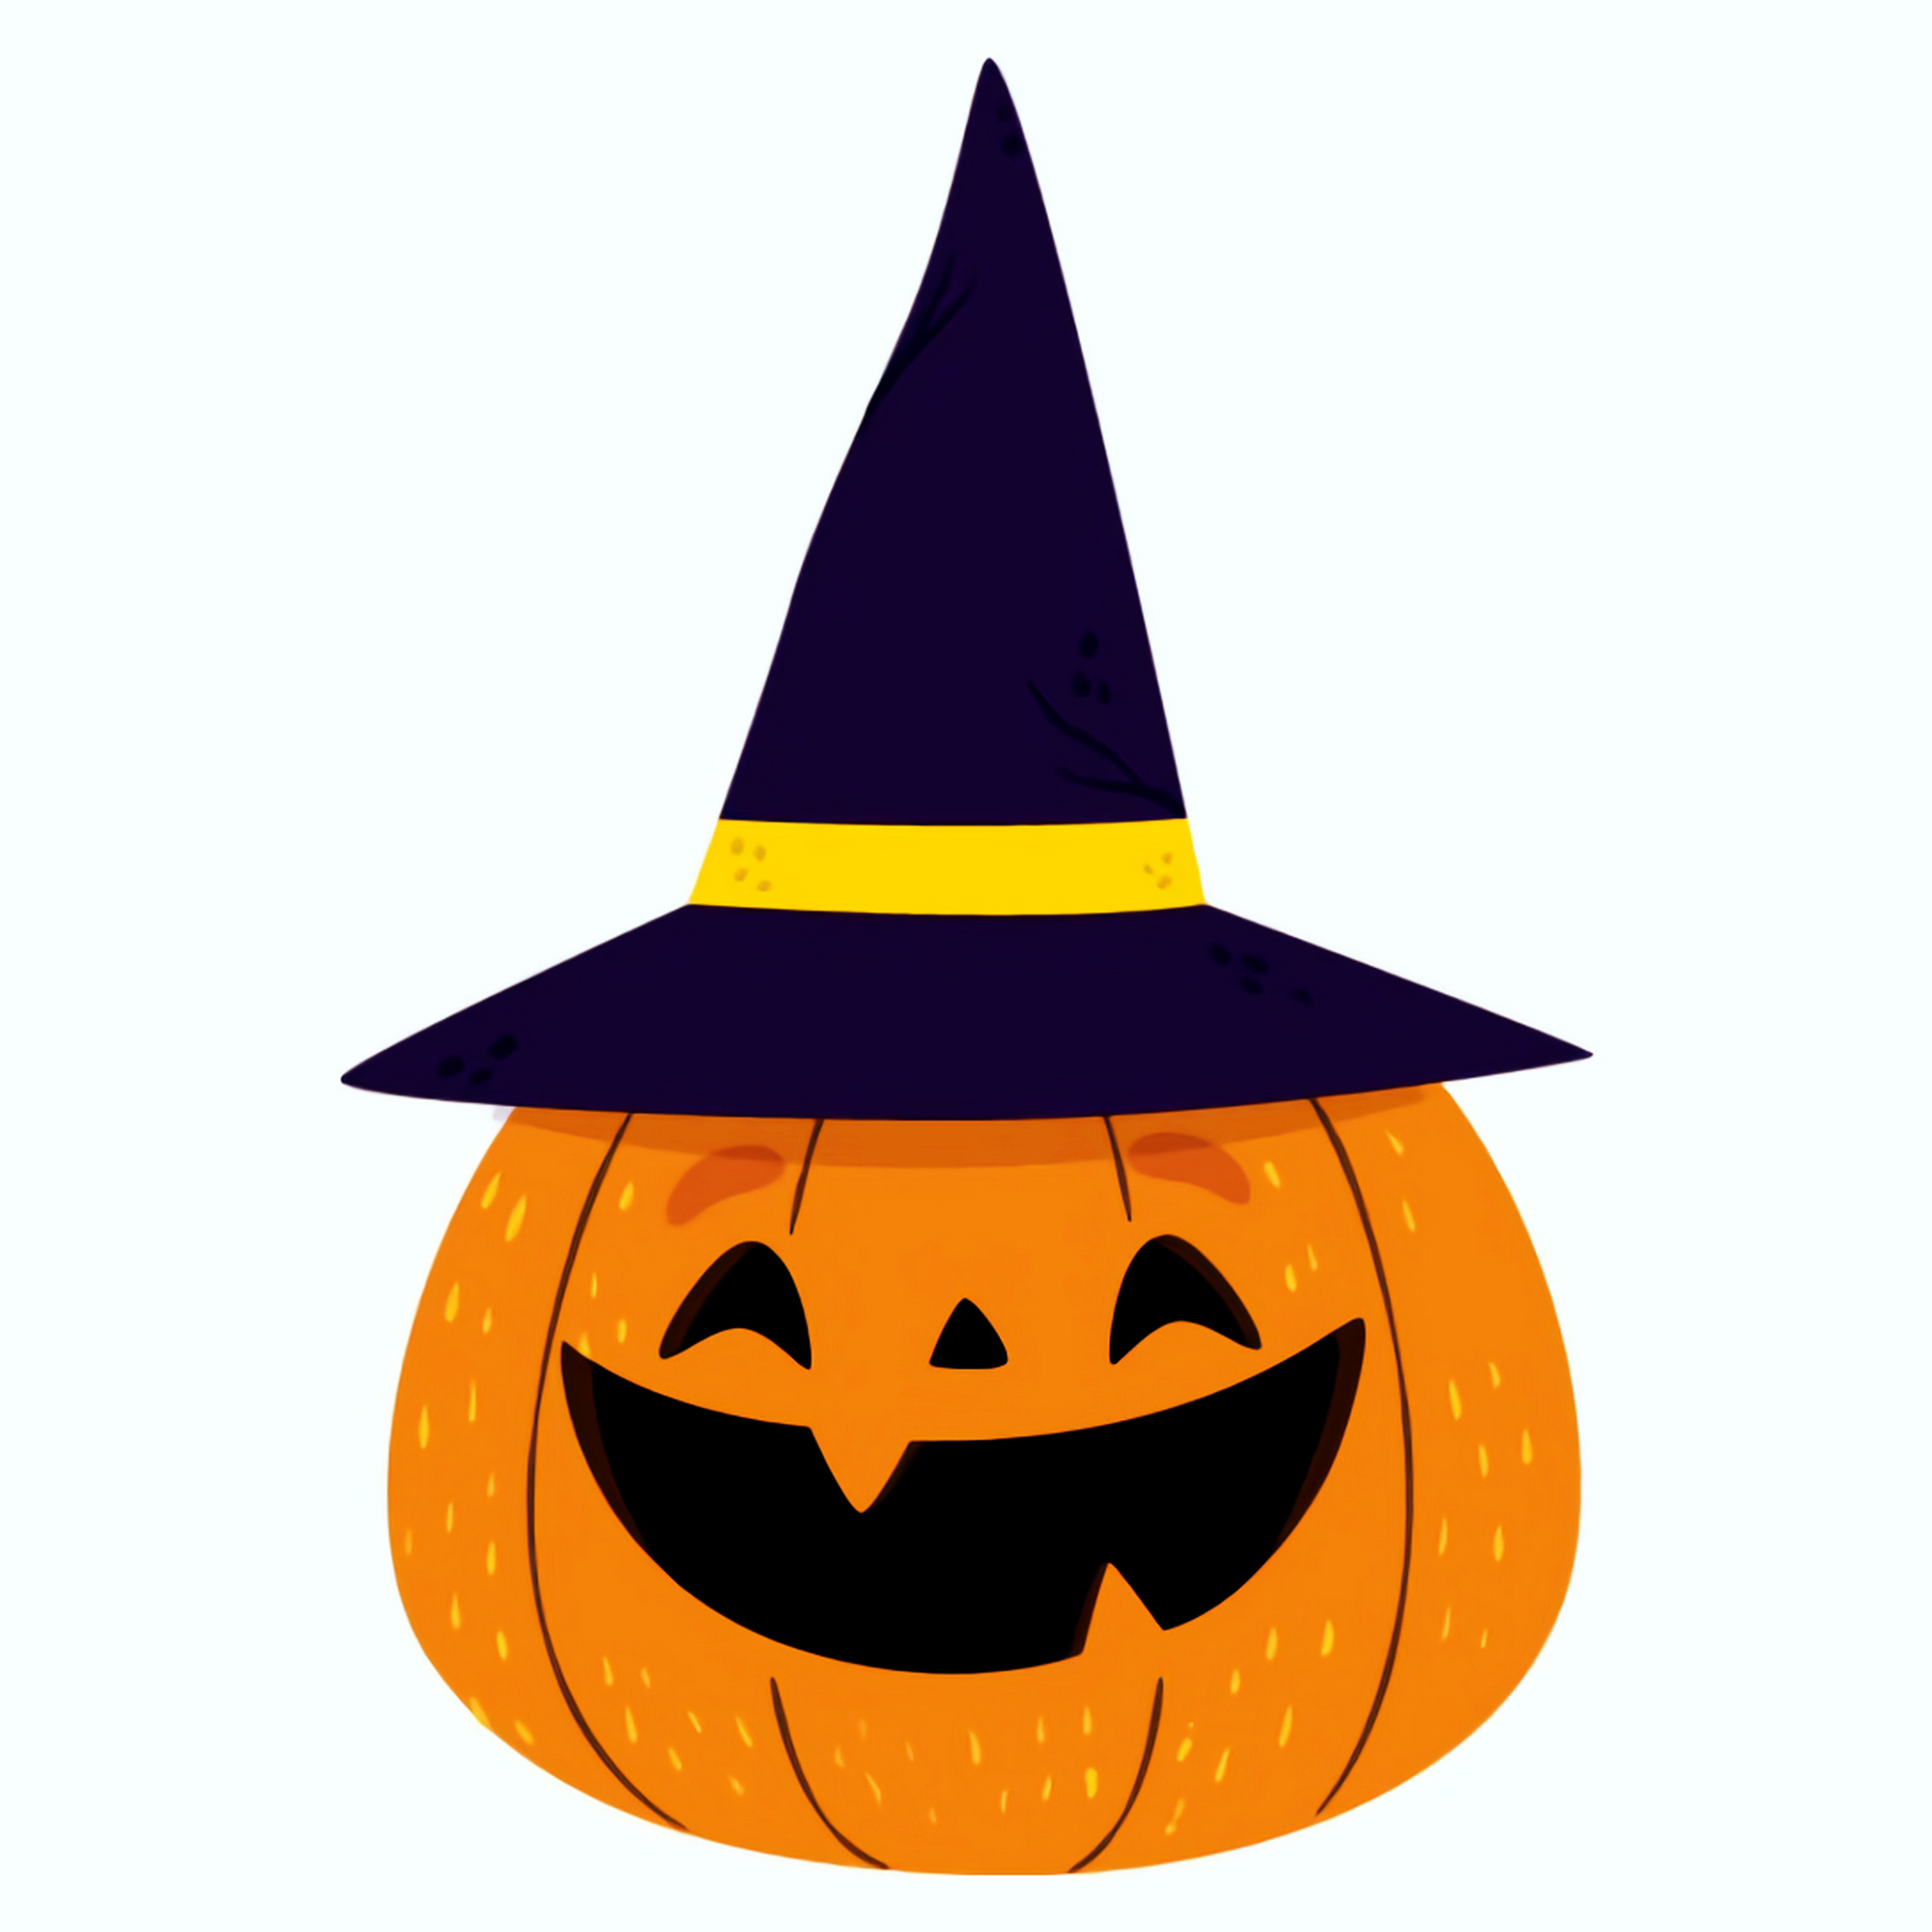 Illustration of a Jack-O-Lantern wearing a witches hat.